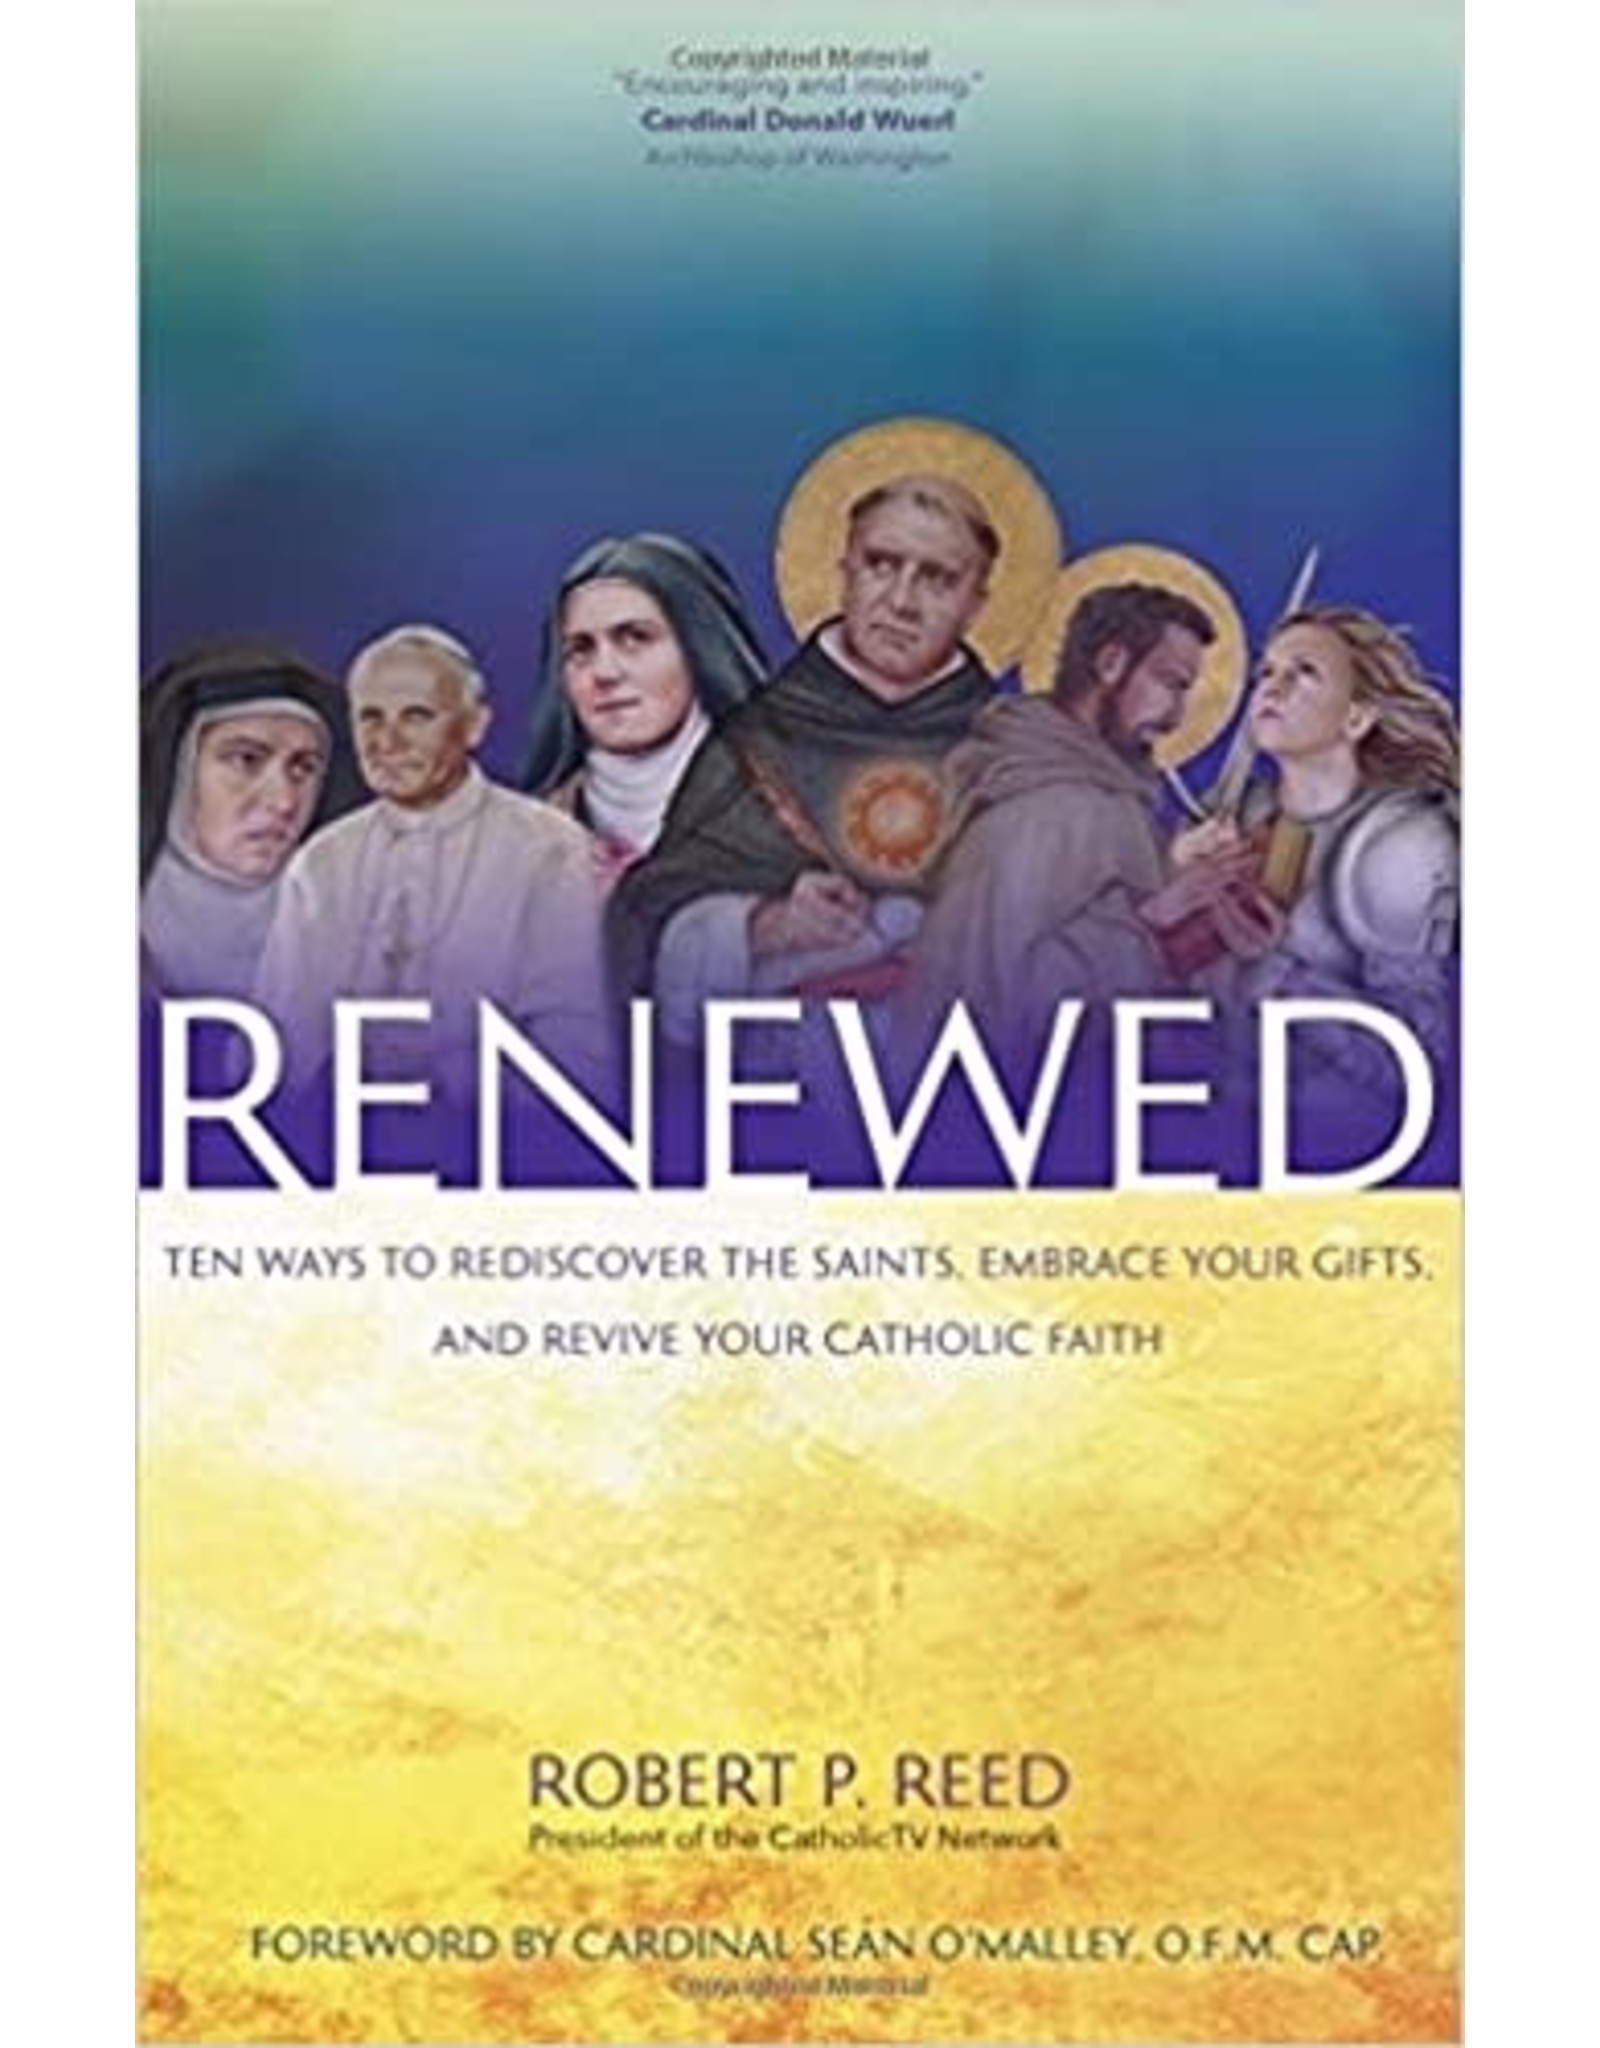 Ave Maria Renewed: Ten Ways to Rediscover the Saints, Embrace Your Gifts, and Revive Your Catholic Faith